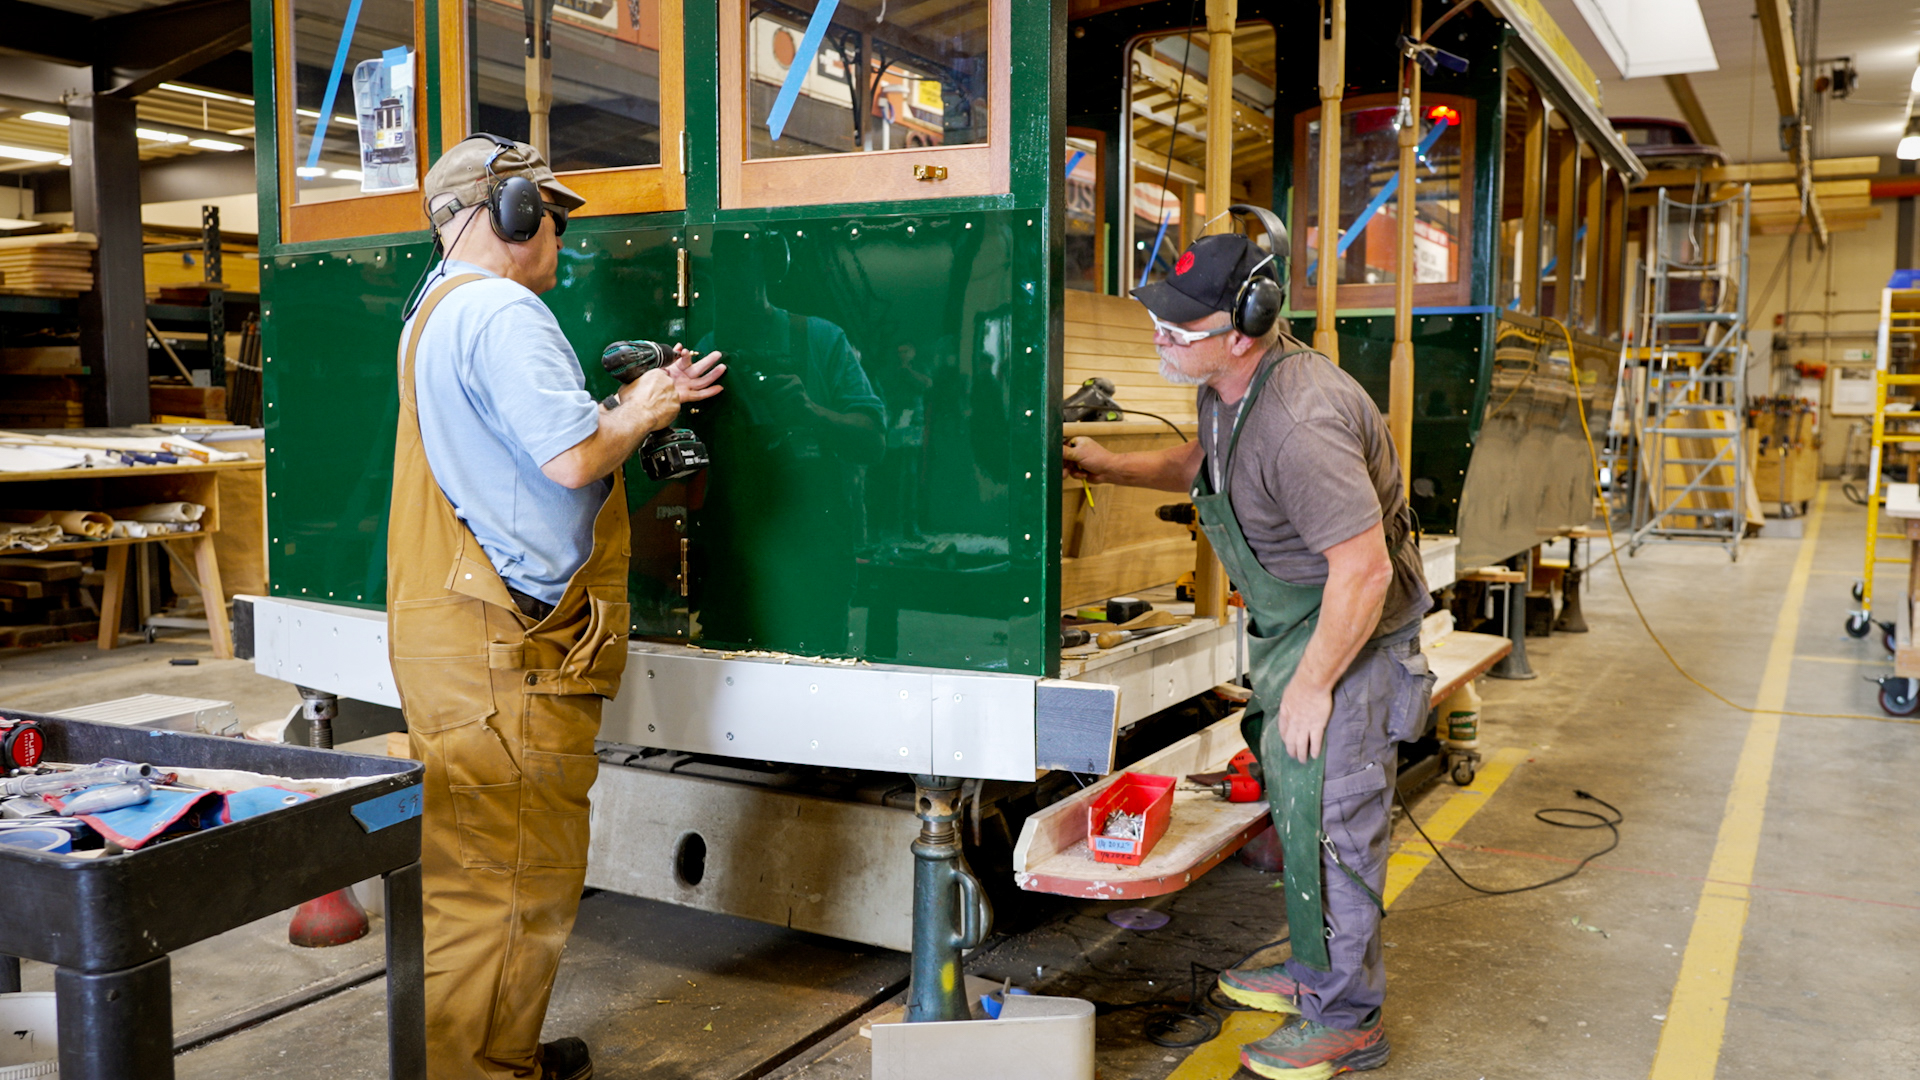 Two carpenters work on the front of a green half-built San Francisco cable car inside a workshop.